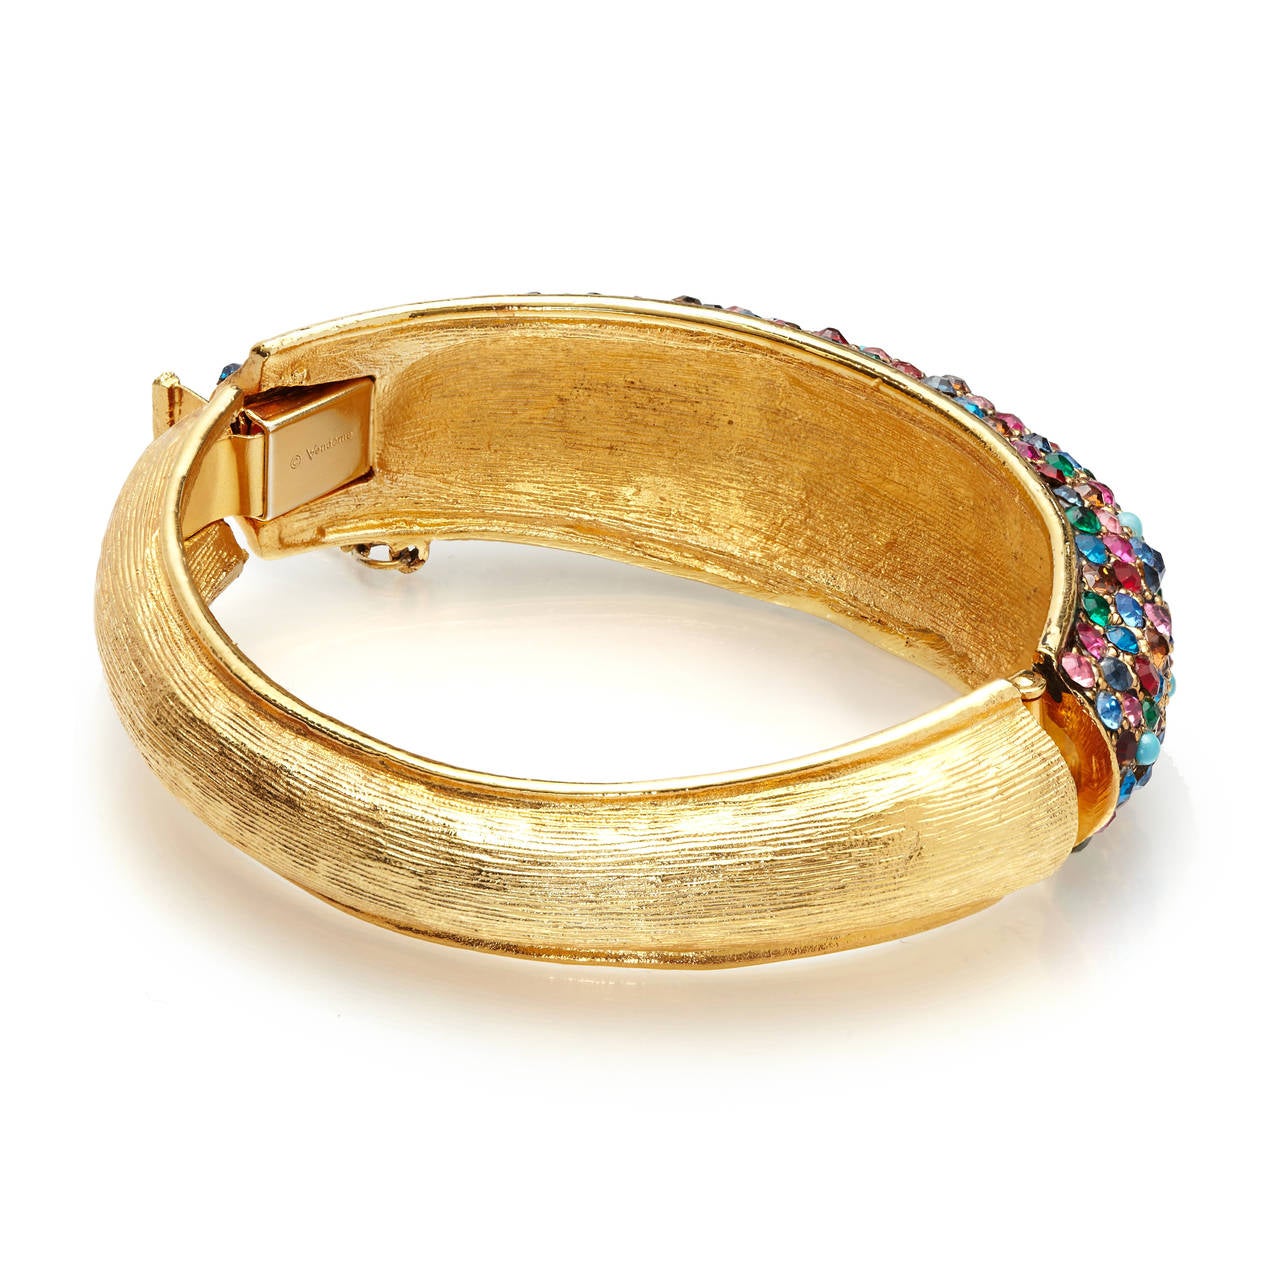 Solid and beautifully crafted heavily gold plated bangle by Vendome, the high-end jewellery line made by Coro. The bangle is hinged making it easy to put on and take off. The bottom half is textured gold and the top half is encrusted with